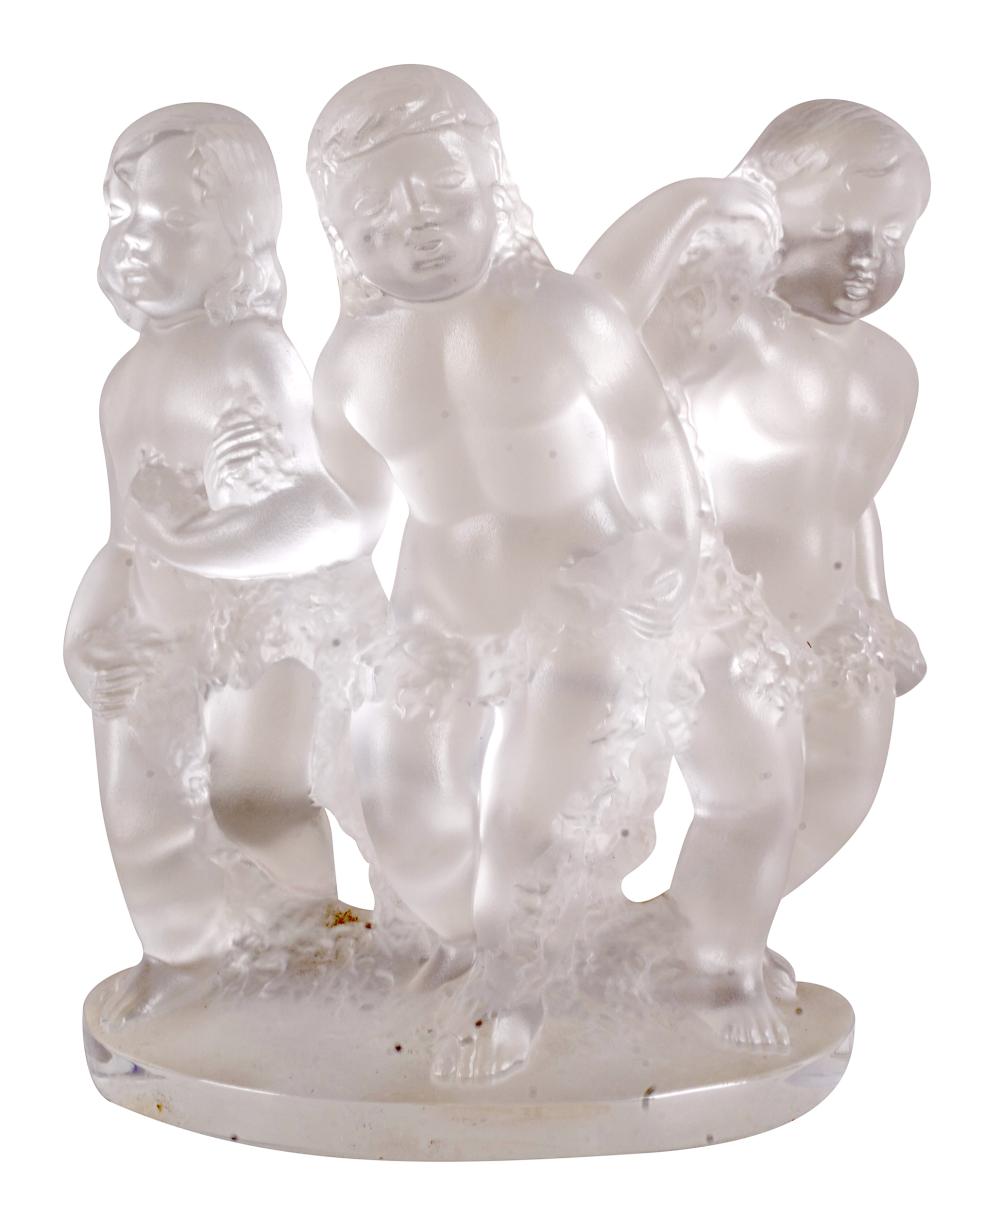 LALIQUE "LUXEMBOURG" GLASS FIGURAL